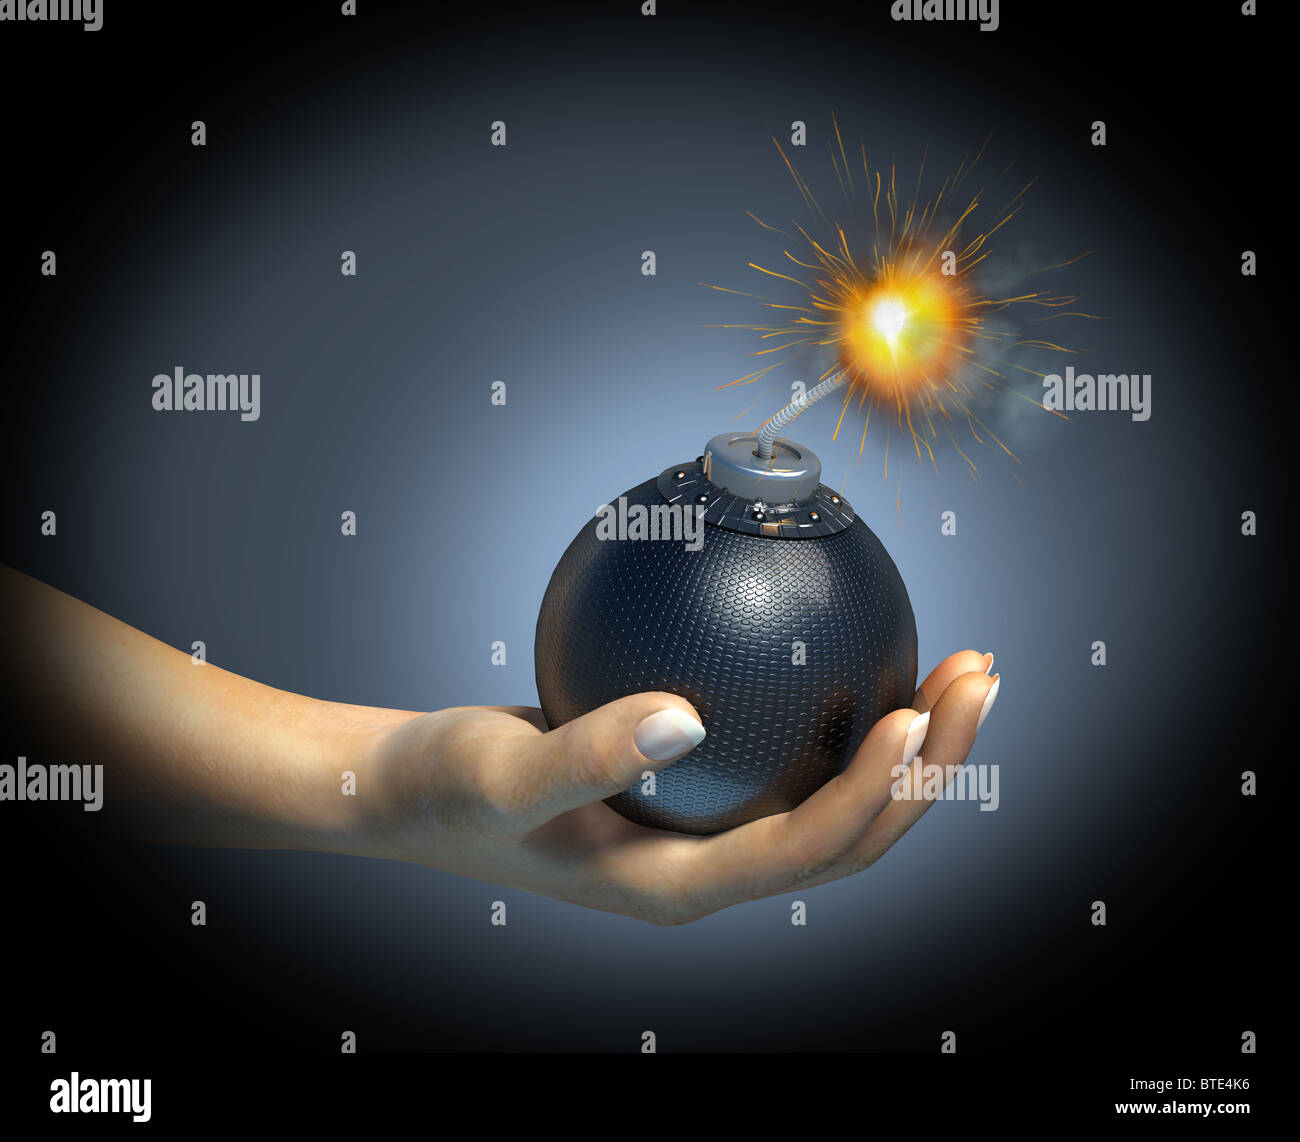 Human hand holding a bomb with burning fuse, on dark background. Stock Photo